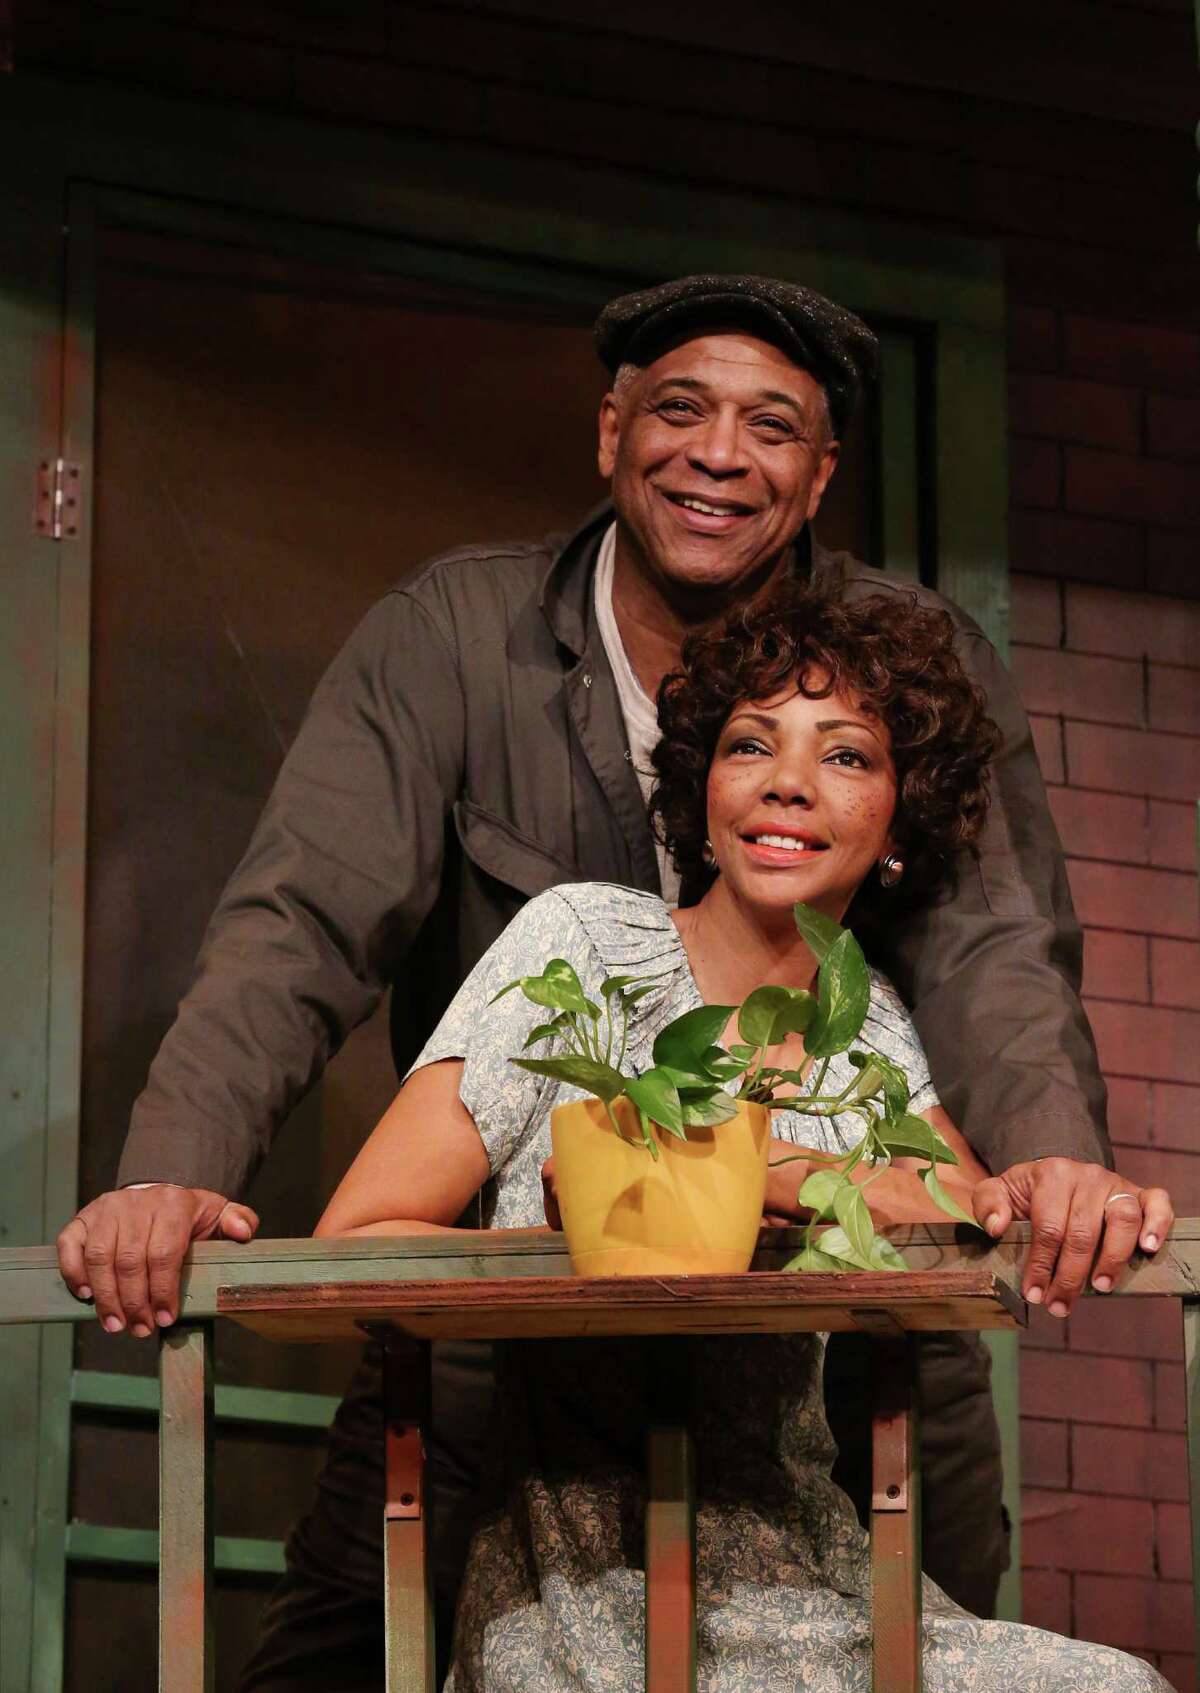 Alex Morris, Sr., left, performs as Troy Maxson, with Detria Ward, performing as Rose Maxson, during a scene from "Fences" at Ensemble Theatre Wednesday, Jan. 20, 2016, in Houston. ( Jon Shapley / Houston Chronicle )